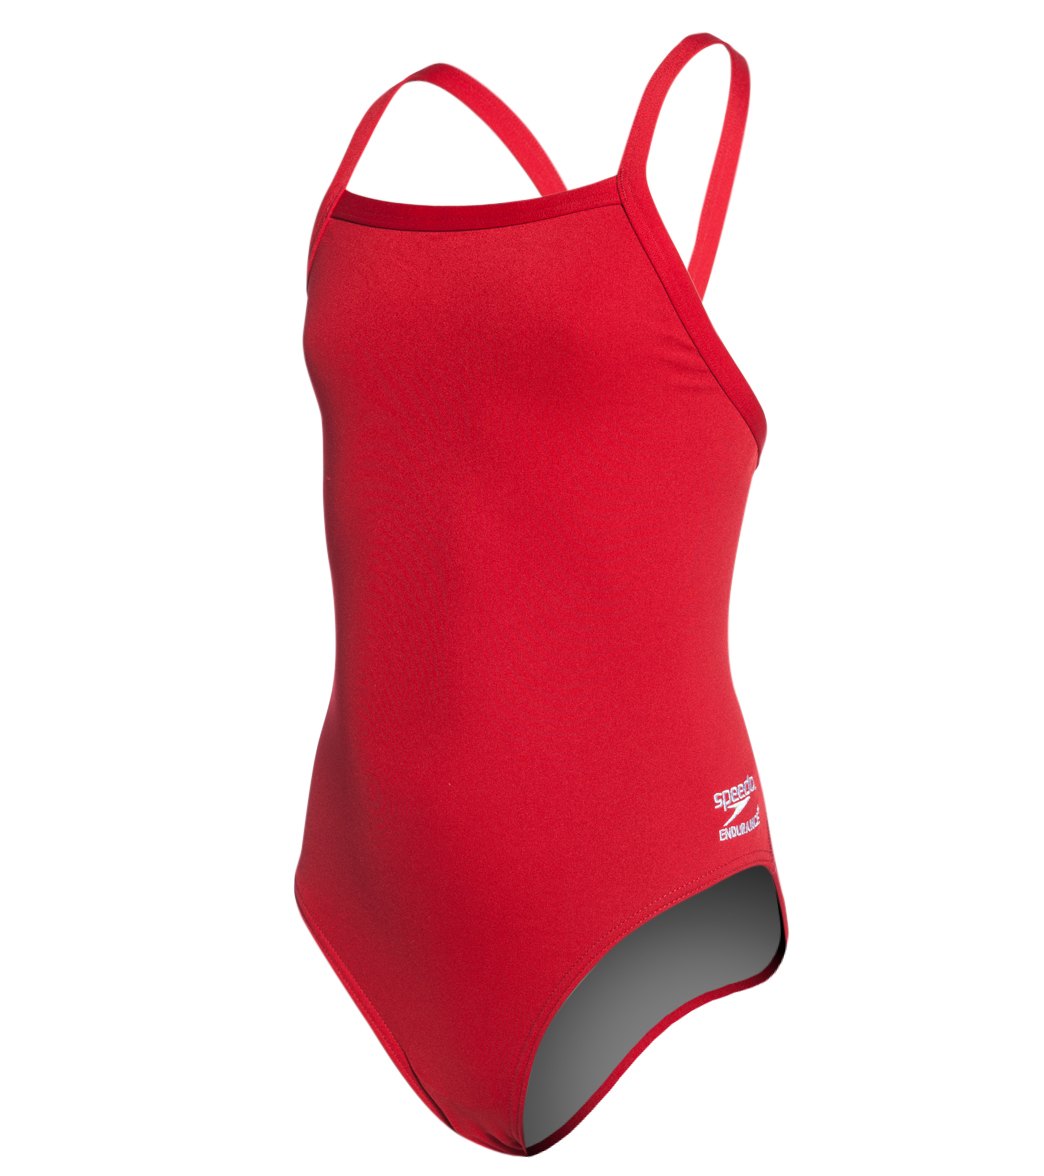 Speedo Girls' Solid Endurance + Flyback Training One Piece Swimsuit - Dark Red 22/6 Polyester/Pbt - Swimoutlet.com